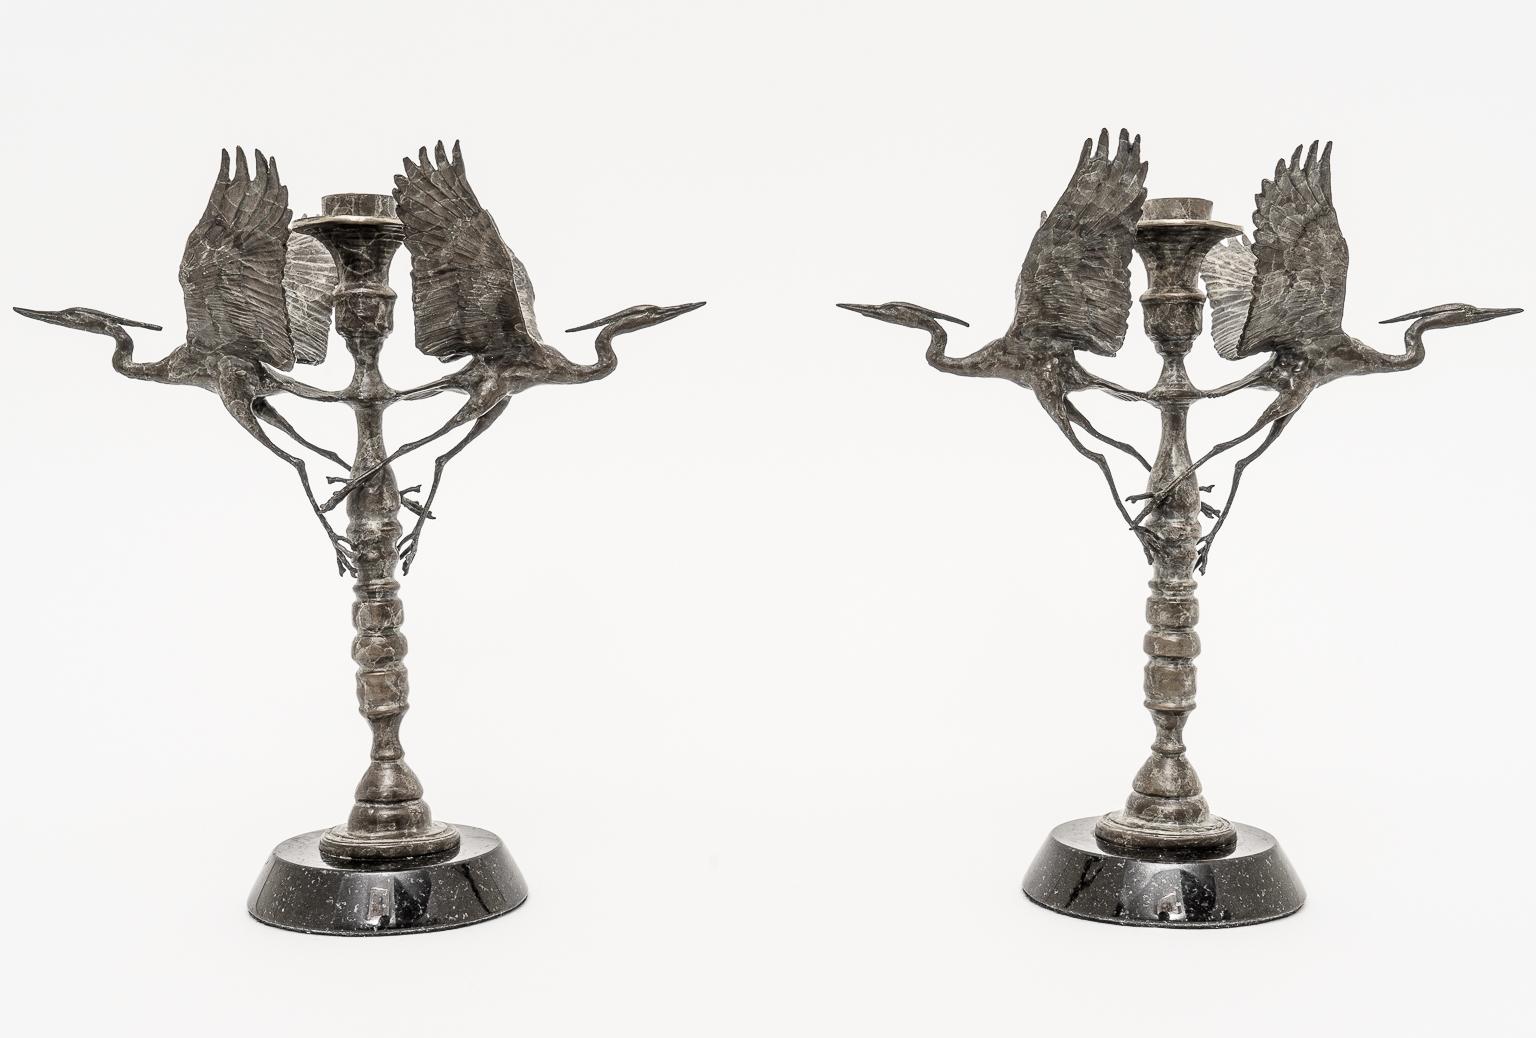 Artisan Ltd Edition bronze crane motif candleholders Signed Dm 97 AM 7/200 and AM 8/200. - a pair. In normal light these are somewhat dark but we super-flooded with light to show details.

Note: Signed AM 7/200 and AM 8/200.